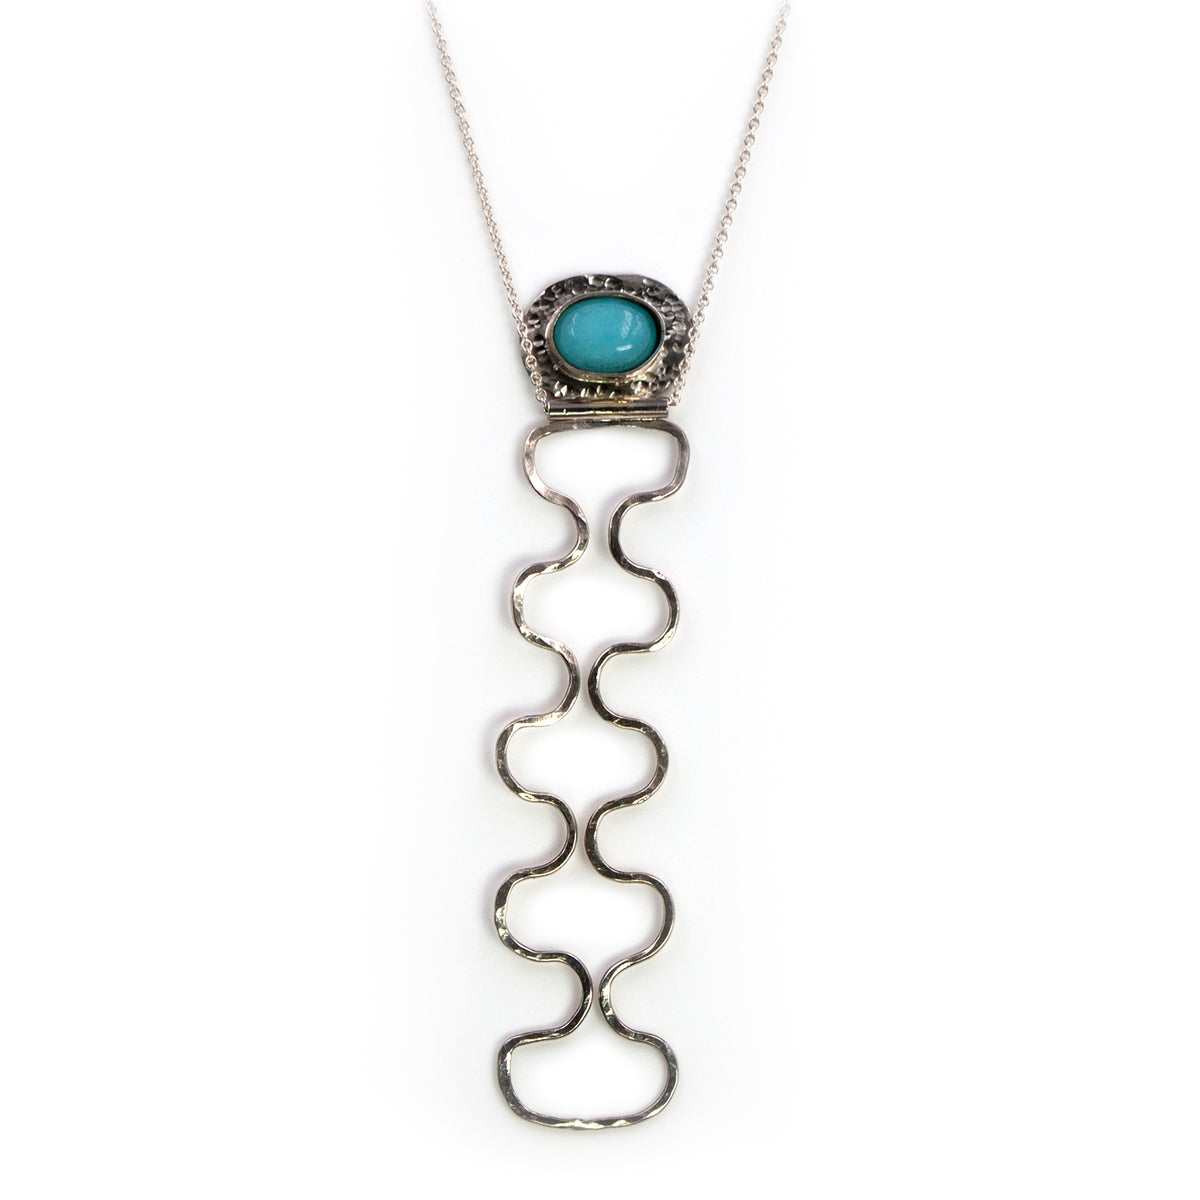 Sterling silver Ripple necklace with amazonite stone by Rouaida.